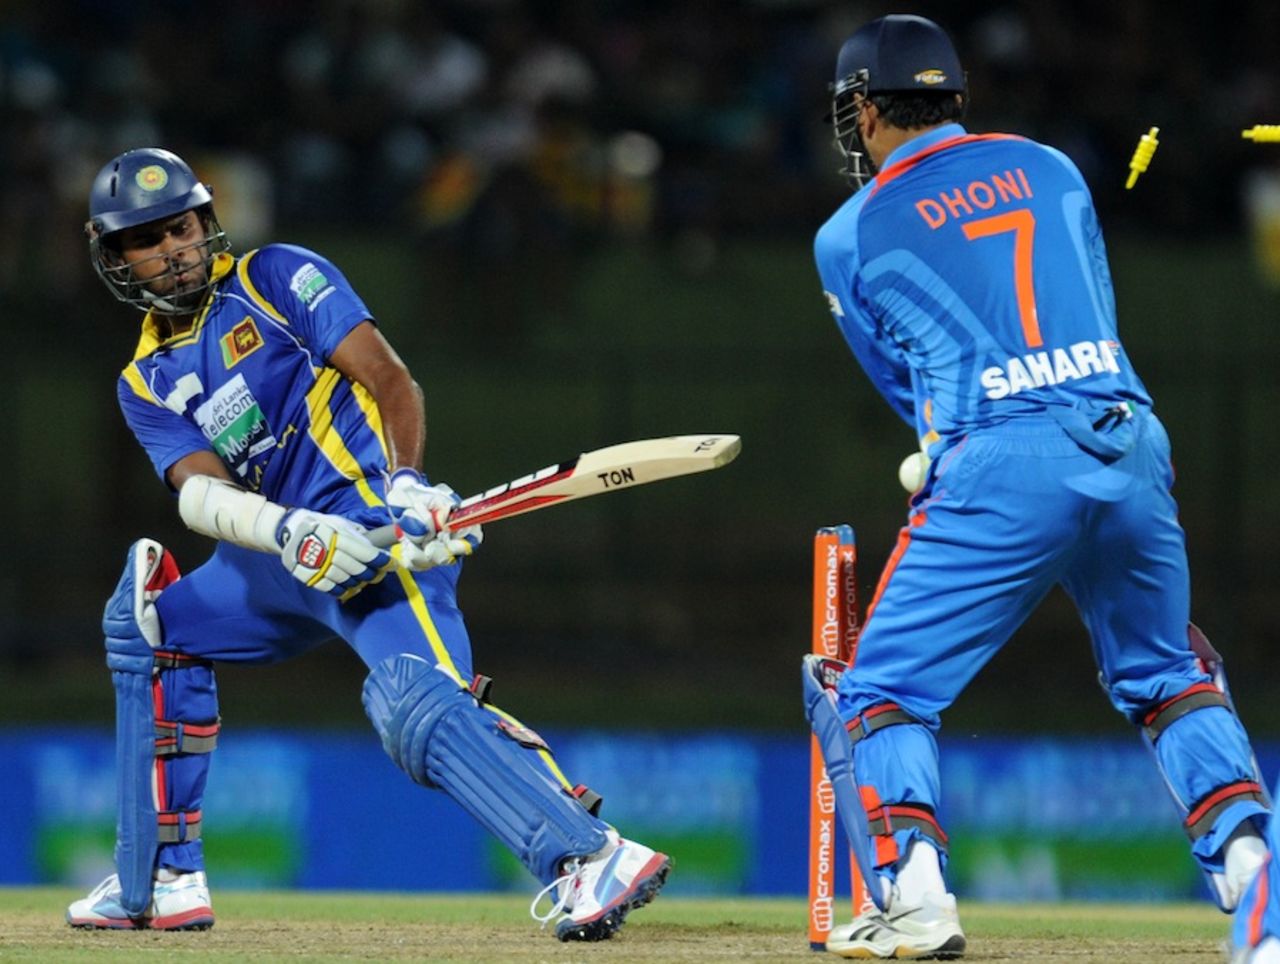 Lahiru Thirimanne was out attempting a reverse sweep, Sri Lanka v India, Only T20I, Pallekele, August 7, 2012